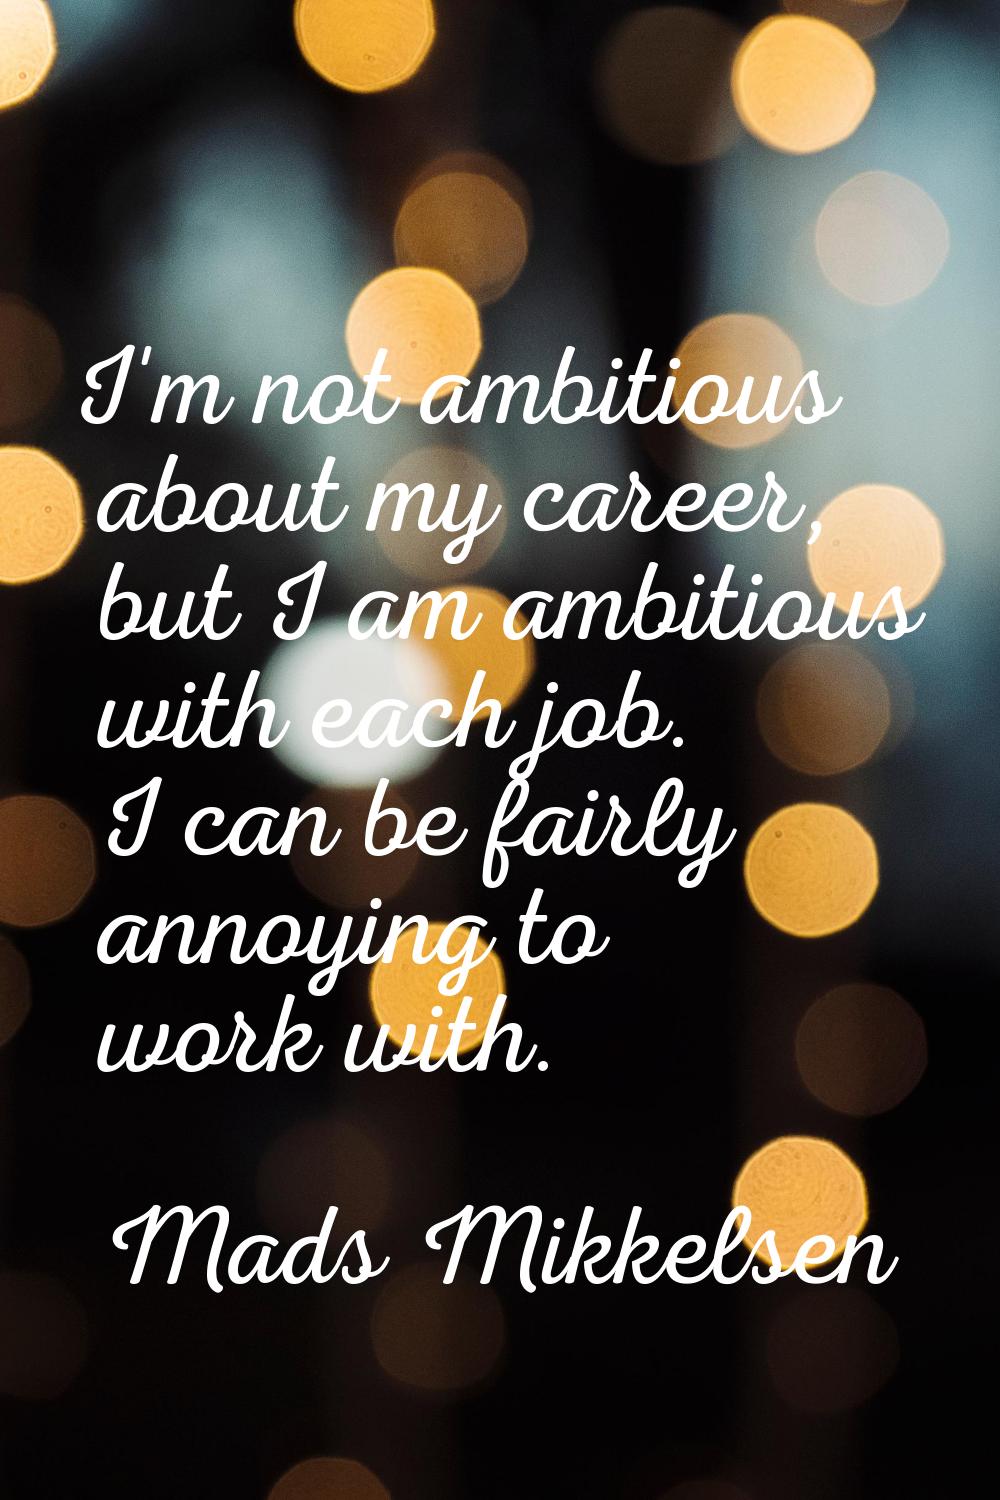 I'm not ambitious about my career, but I am ambitious with each job. I can be fairly annoying to wo